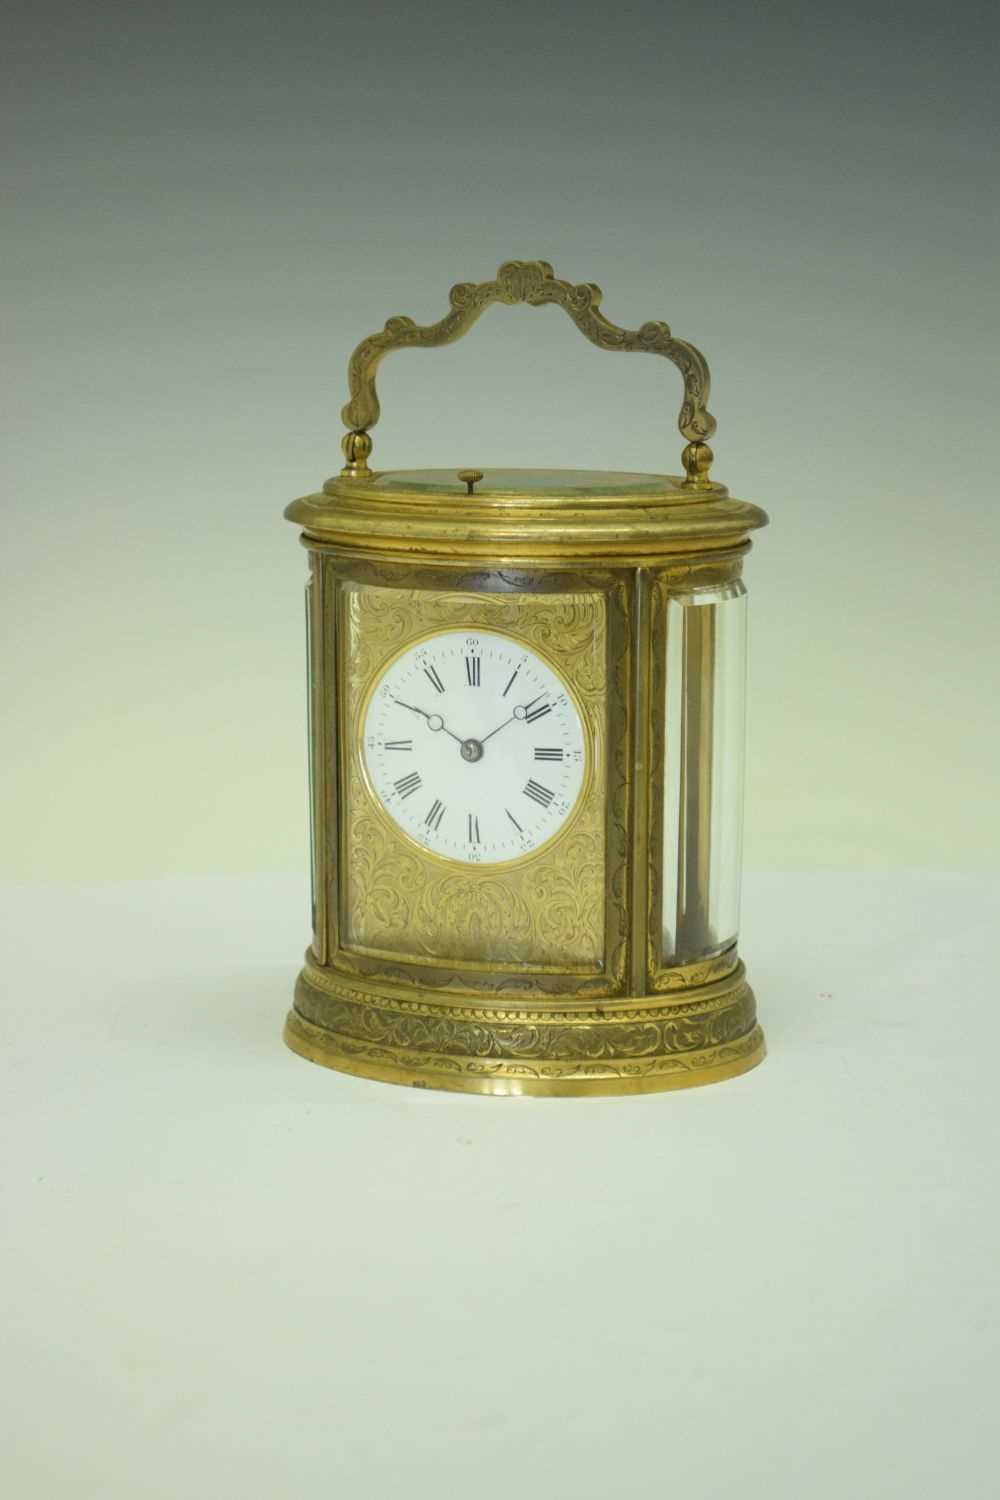 Oval engraved brass-cased repeater carriage clock - Image 9 of 9